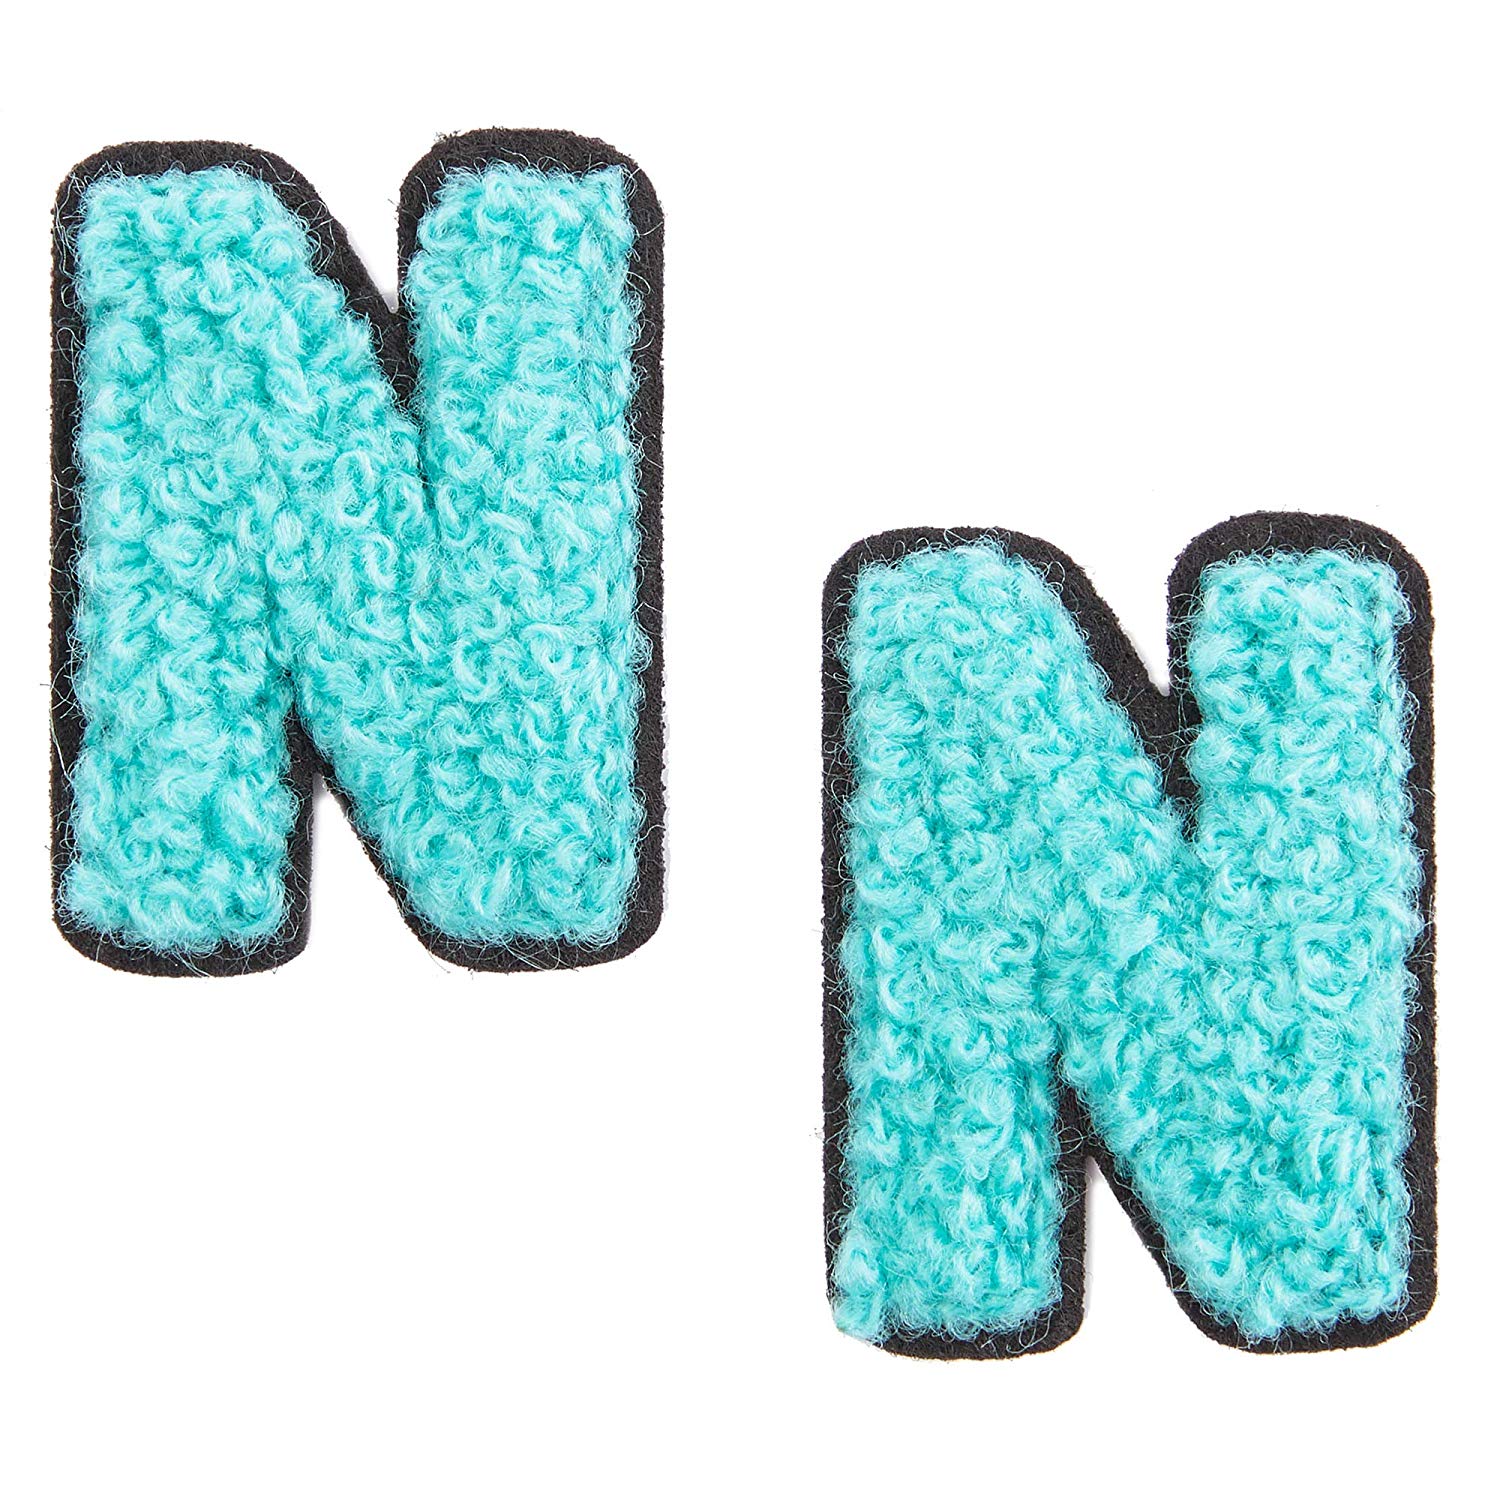 Bright Creations 52 Pieces Iron on Letters for Clothing, 2 Sets A-Z Chenille Letter Patches for Jackets & Denim, 5 Colors (1 inch)